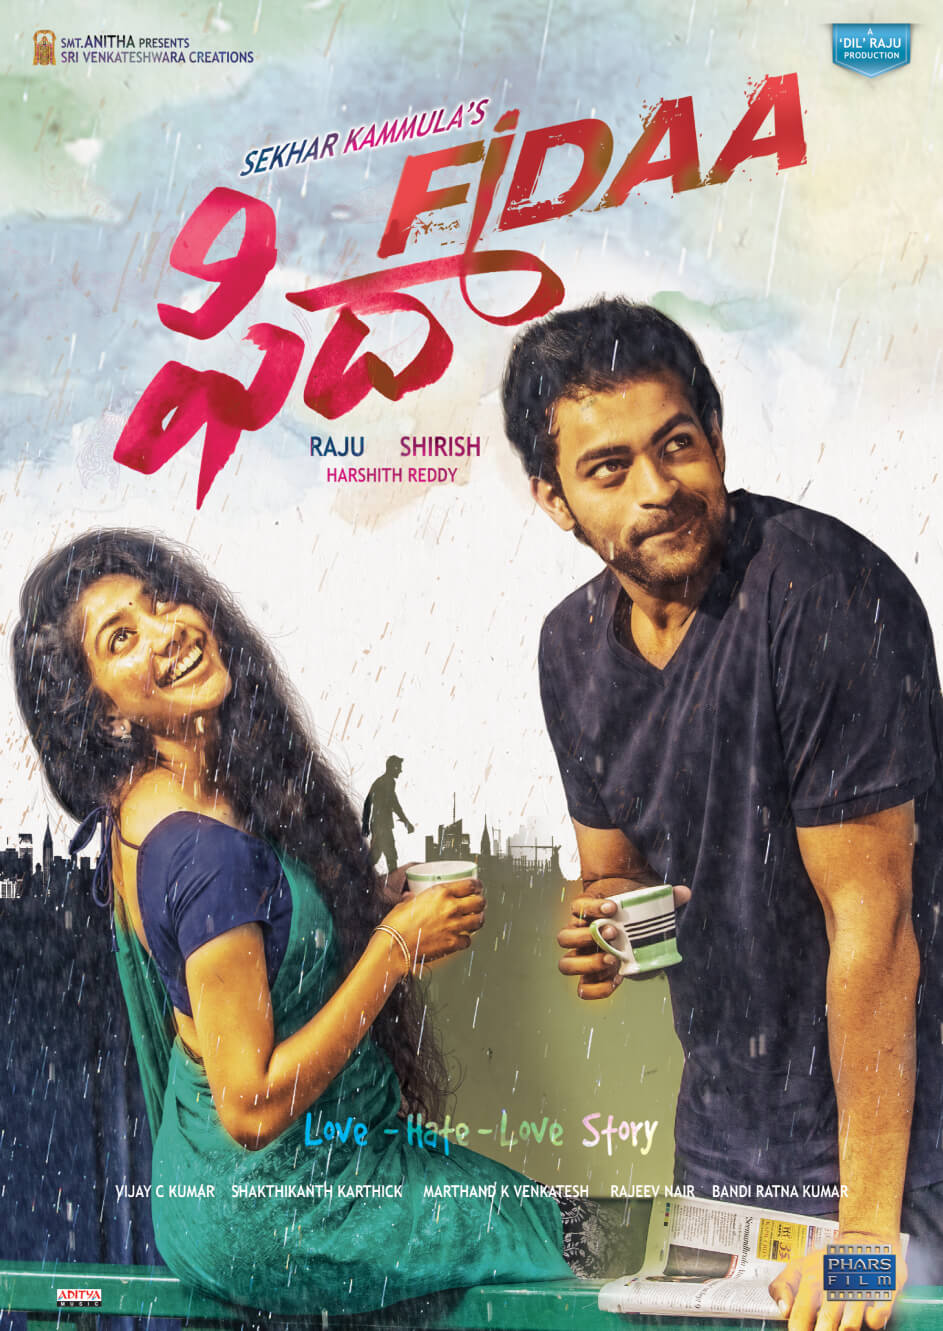 Fidaa Movie (2017) Cast, Release Date, Story, Budget, Collection, Poster, Trailer, Review